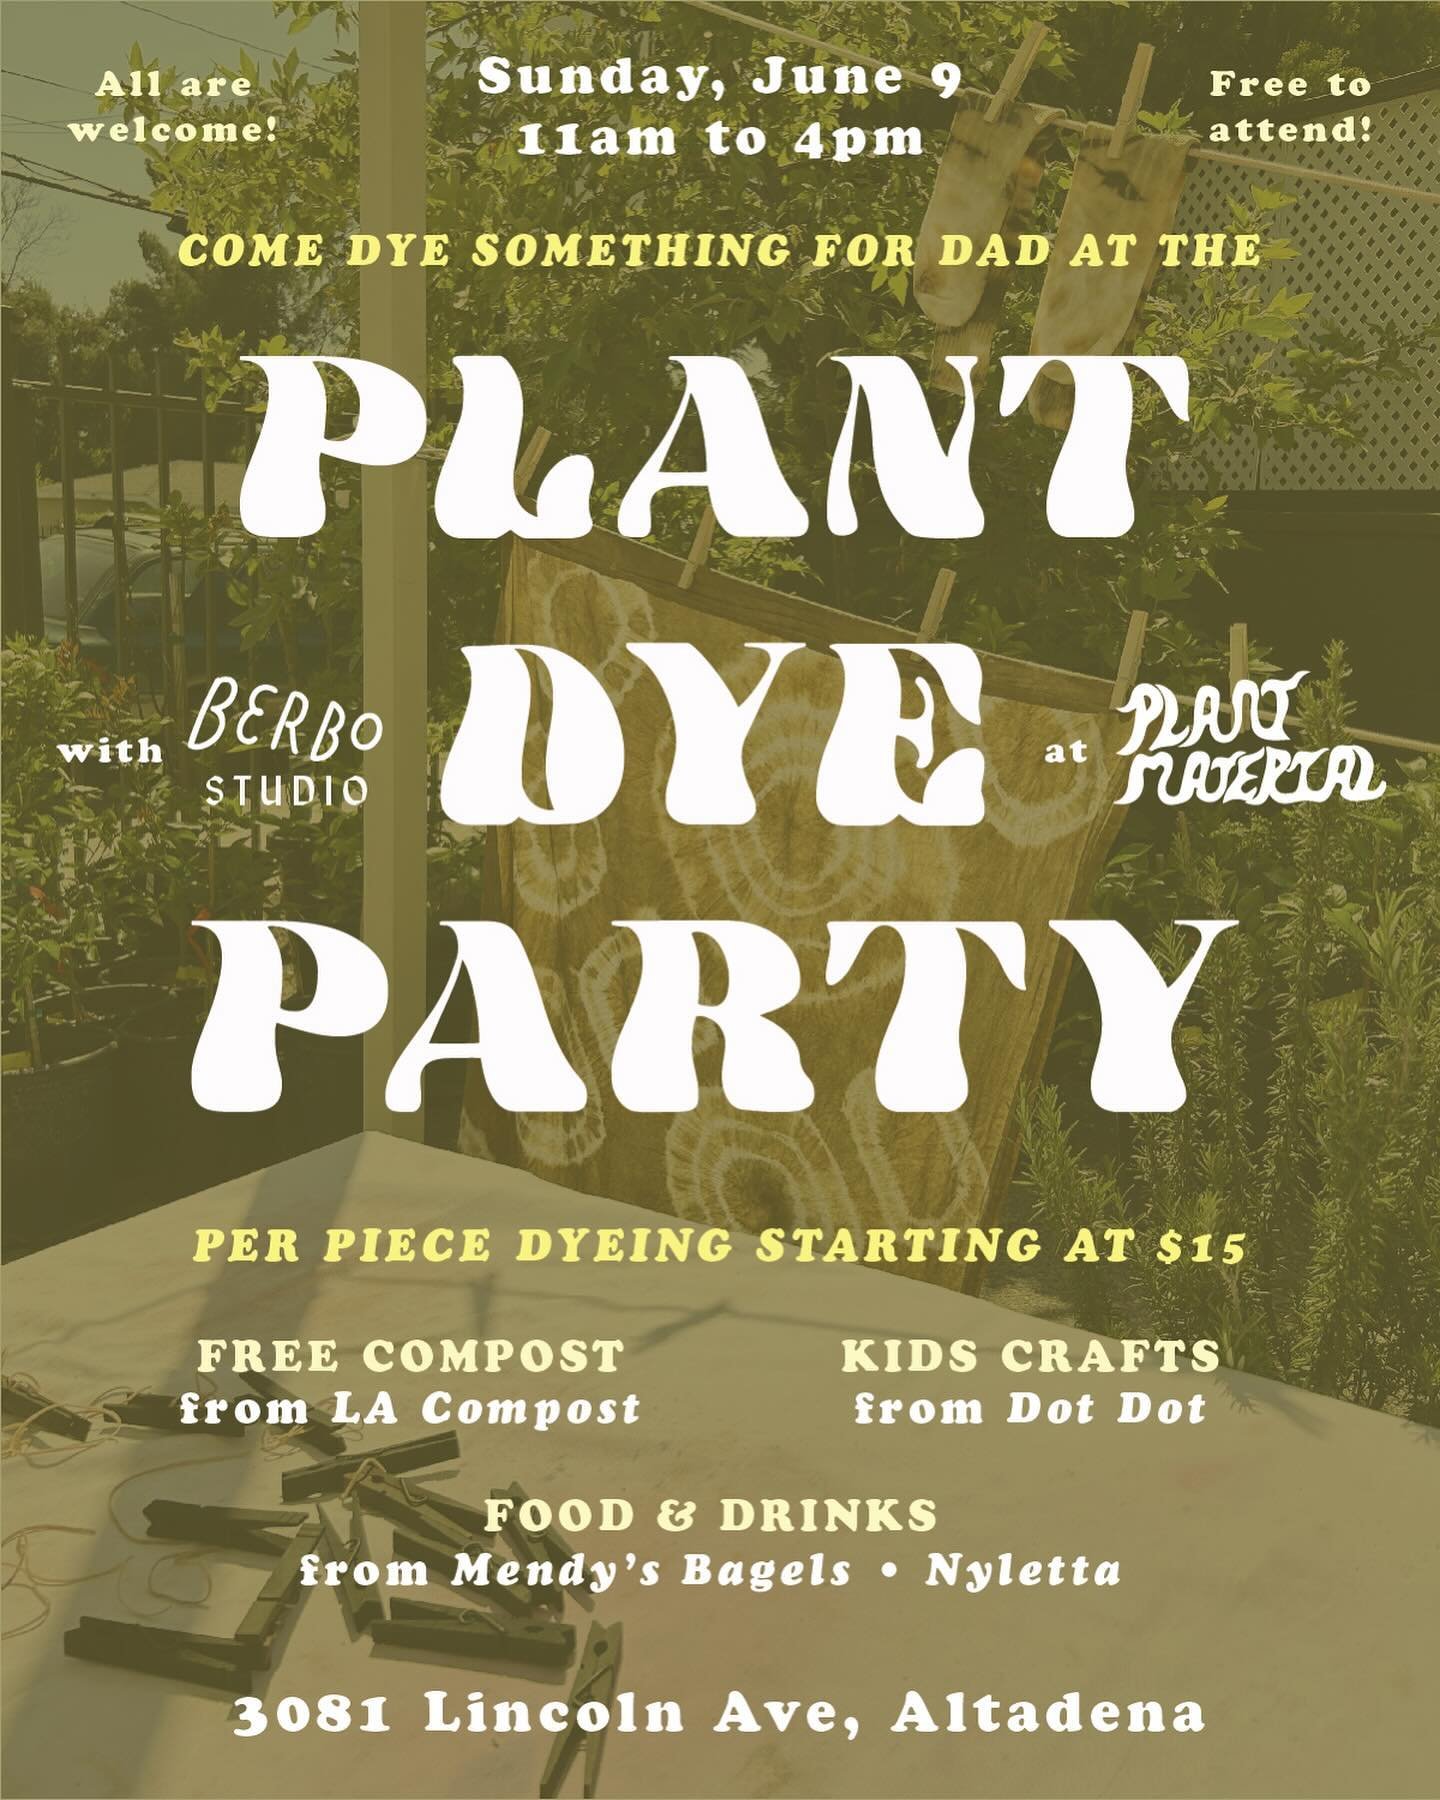 It&rsquo;s that time again! Join me for a plant dye party at&nbsp;@plant_material in Altadena, Dad&rsquo;s Day edition 🌞

I&rsquo;ll have a menu of a la carte blank items for you to dip in my many colored dye pots, including:
@everybody.world tees ♻